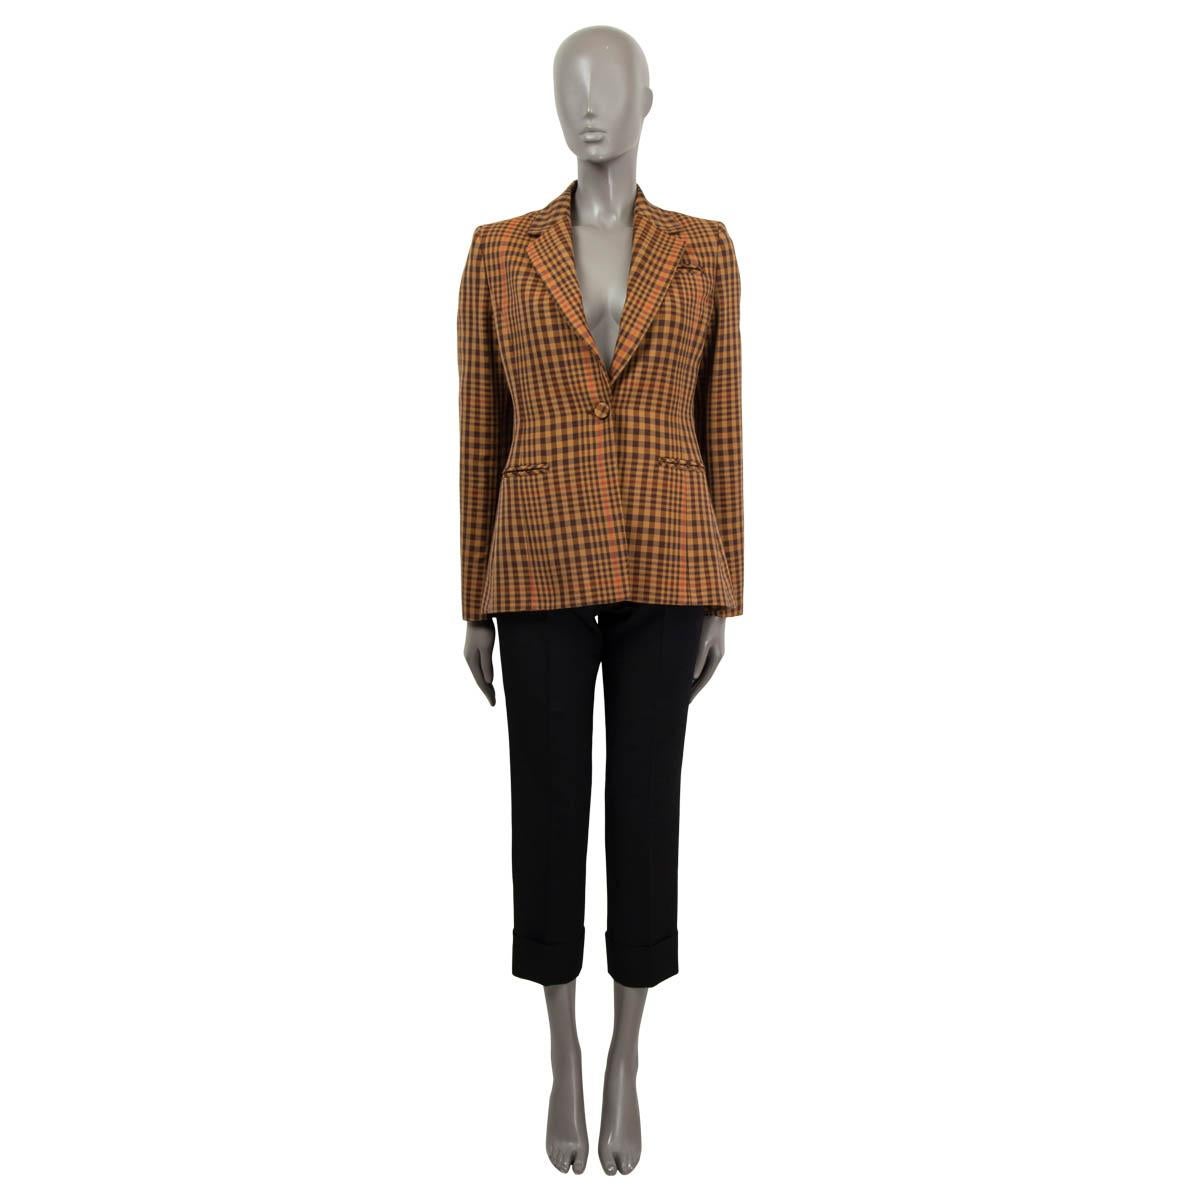 100% authentic Altuzarra checked and fitted blazer jacket in ochre, brown, orange and burgundy wool (54%), polyester (46%). The design opens with one button, has two front slit pockets, one chest pocket and a box pleat at the back. Lined in black